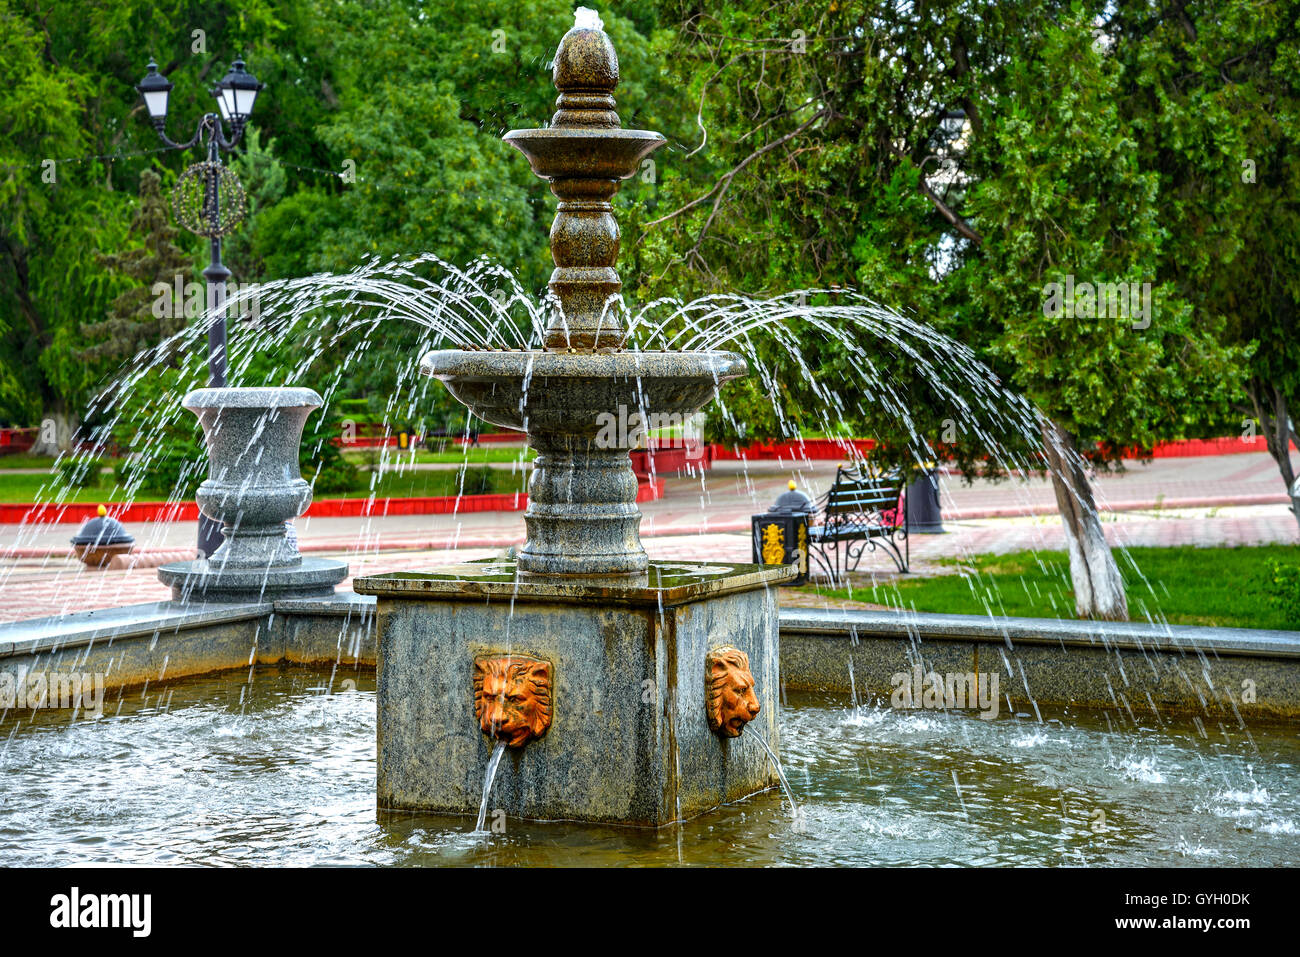 The fountain in city park Stock Photo